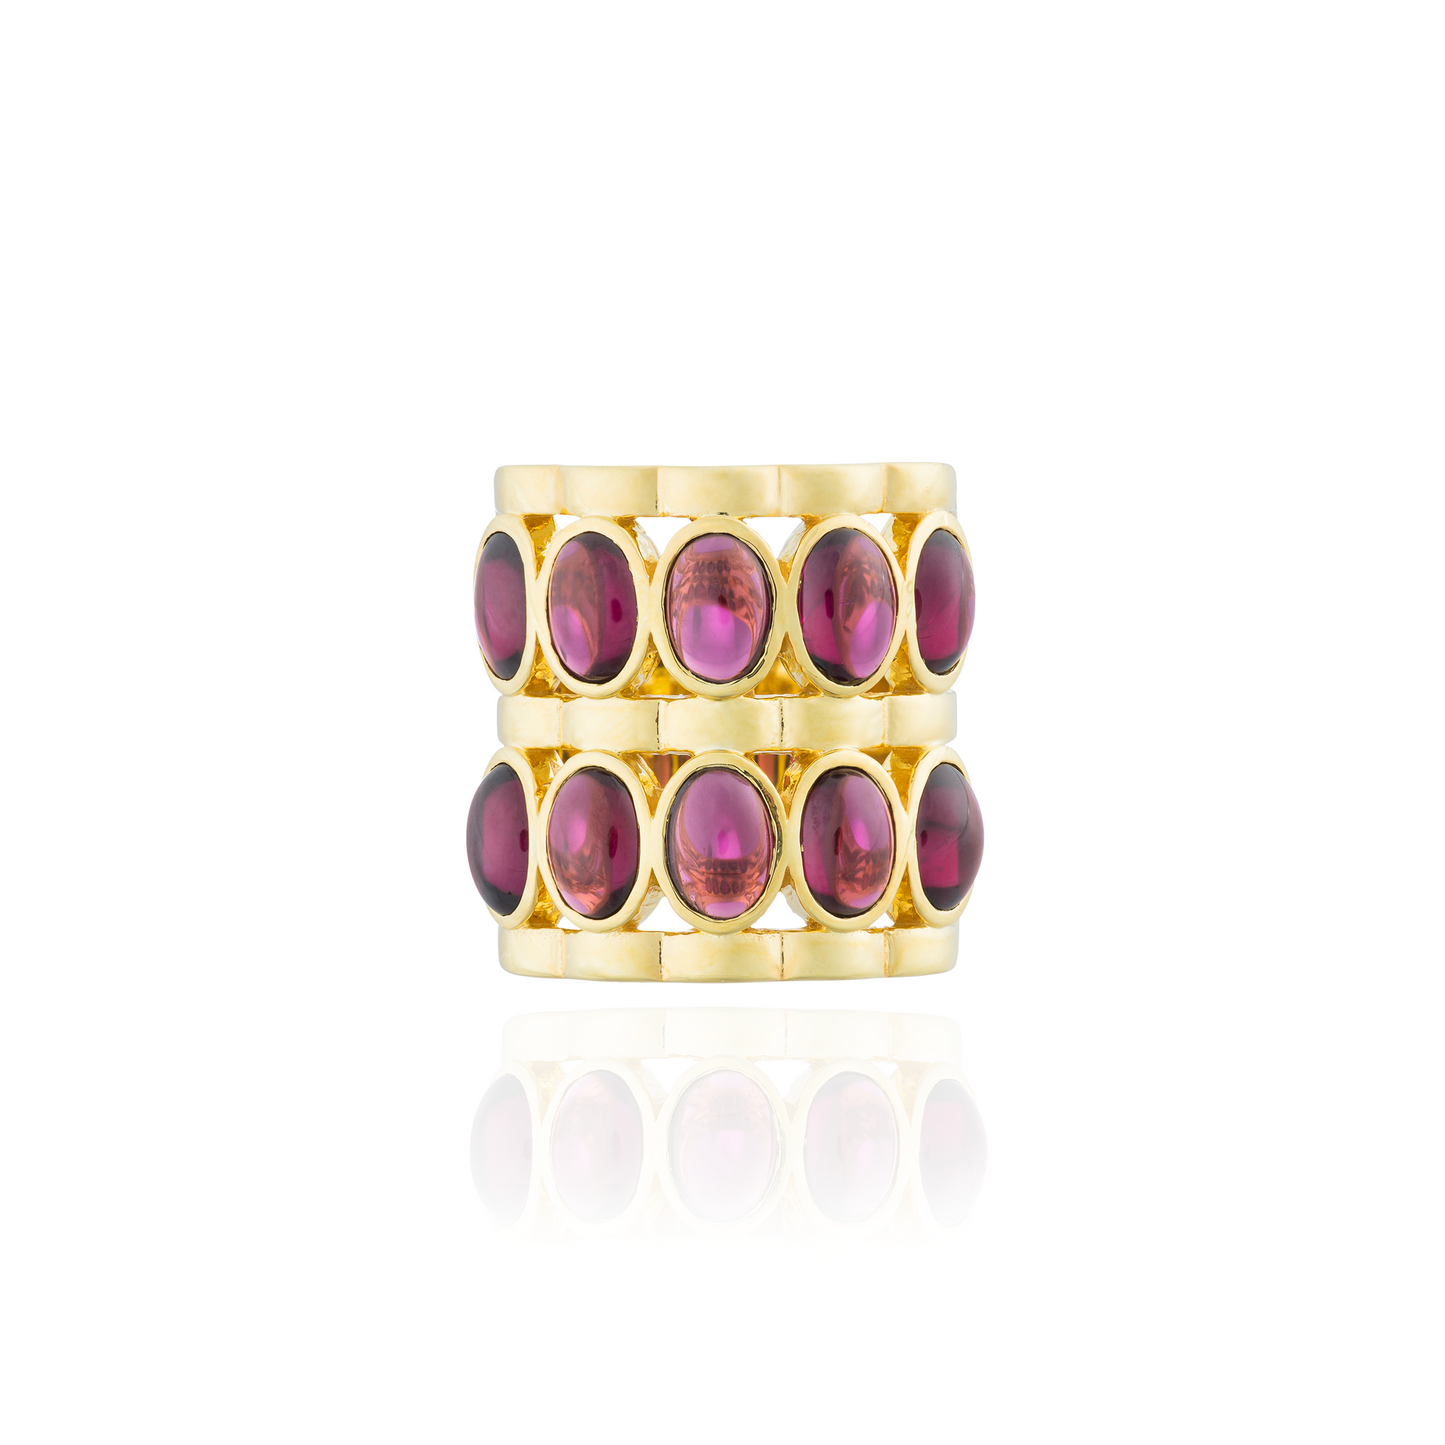 Caramelo 925 Silver Ring Plated in 18K Yellow Gold with Rhodolite Cabouchon